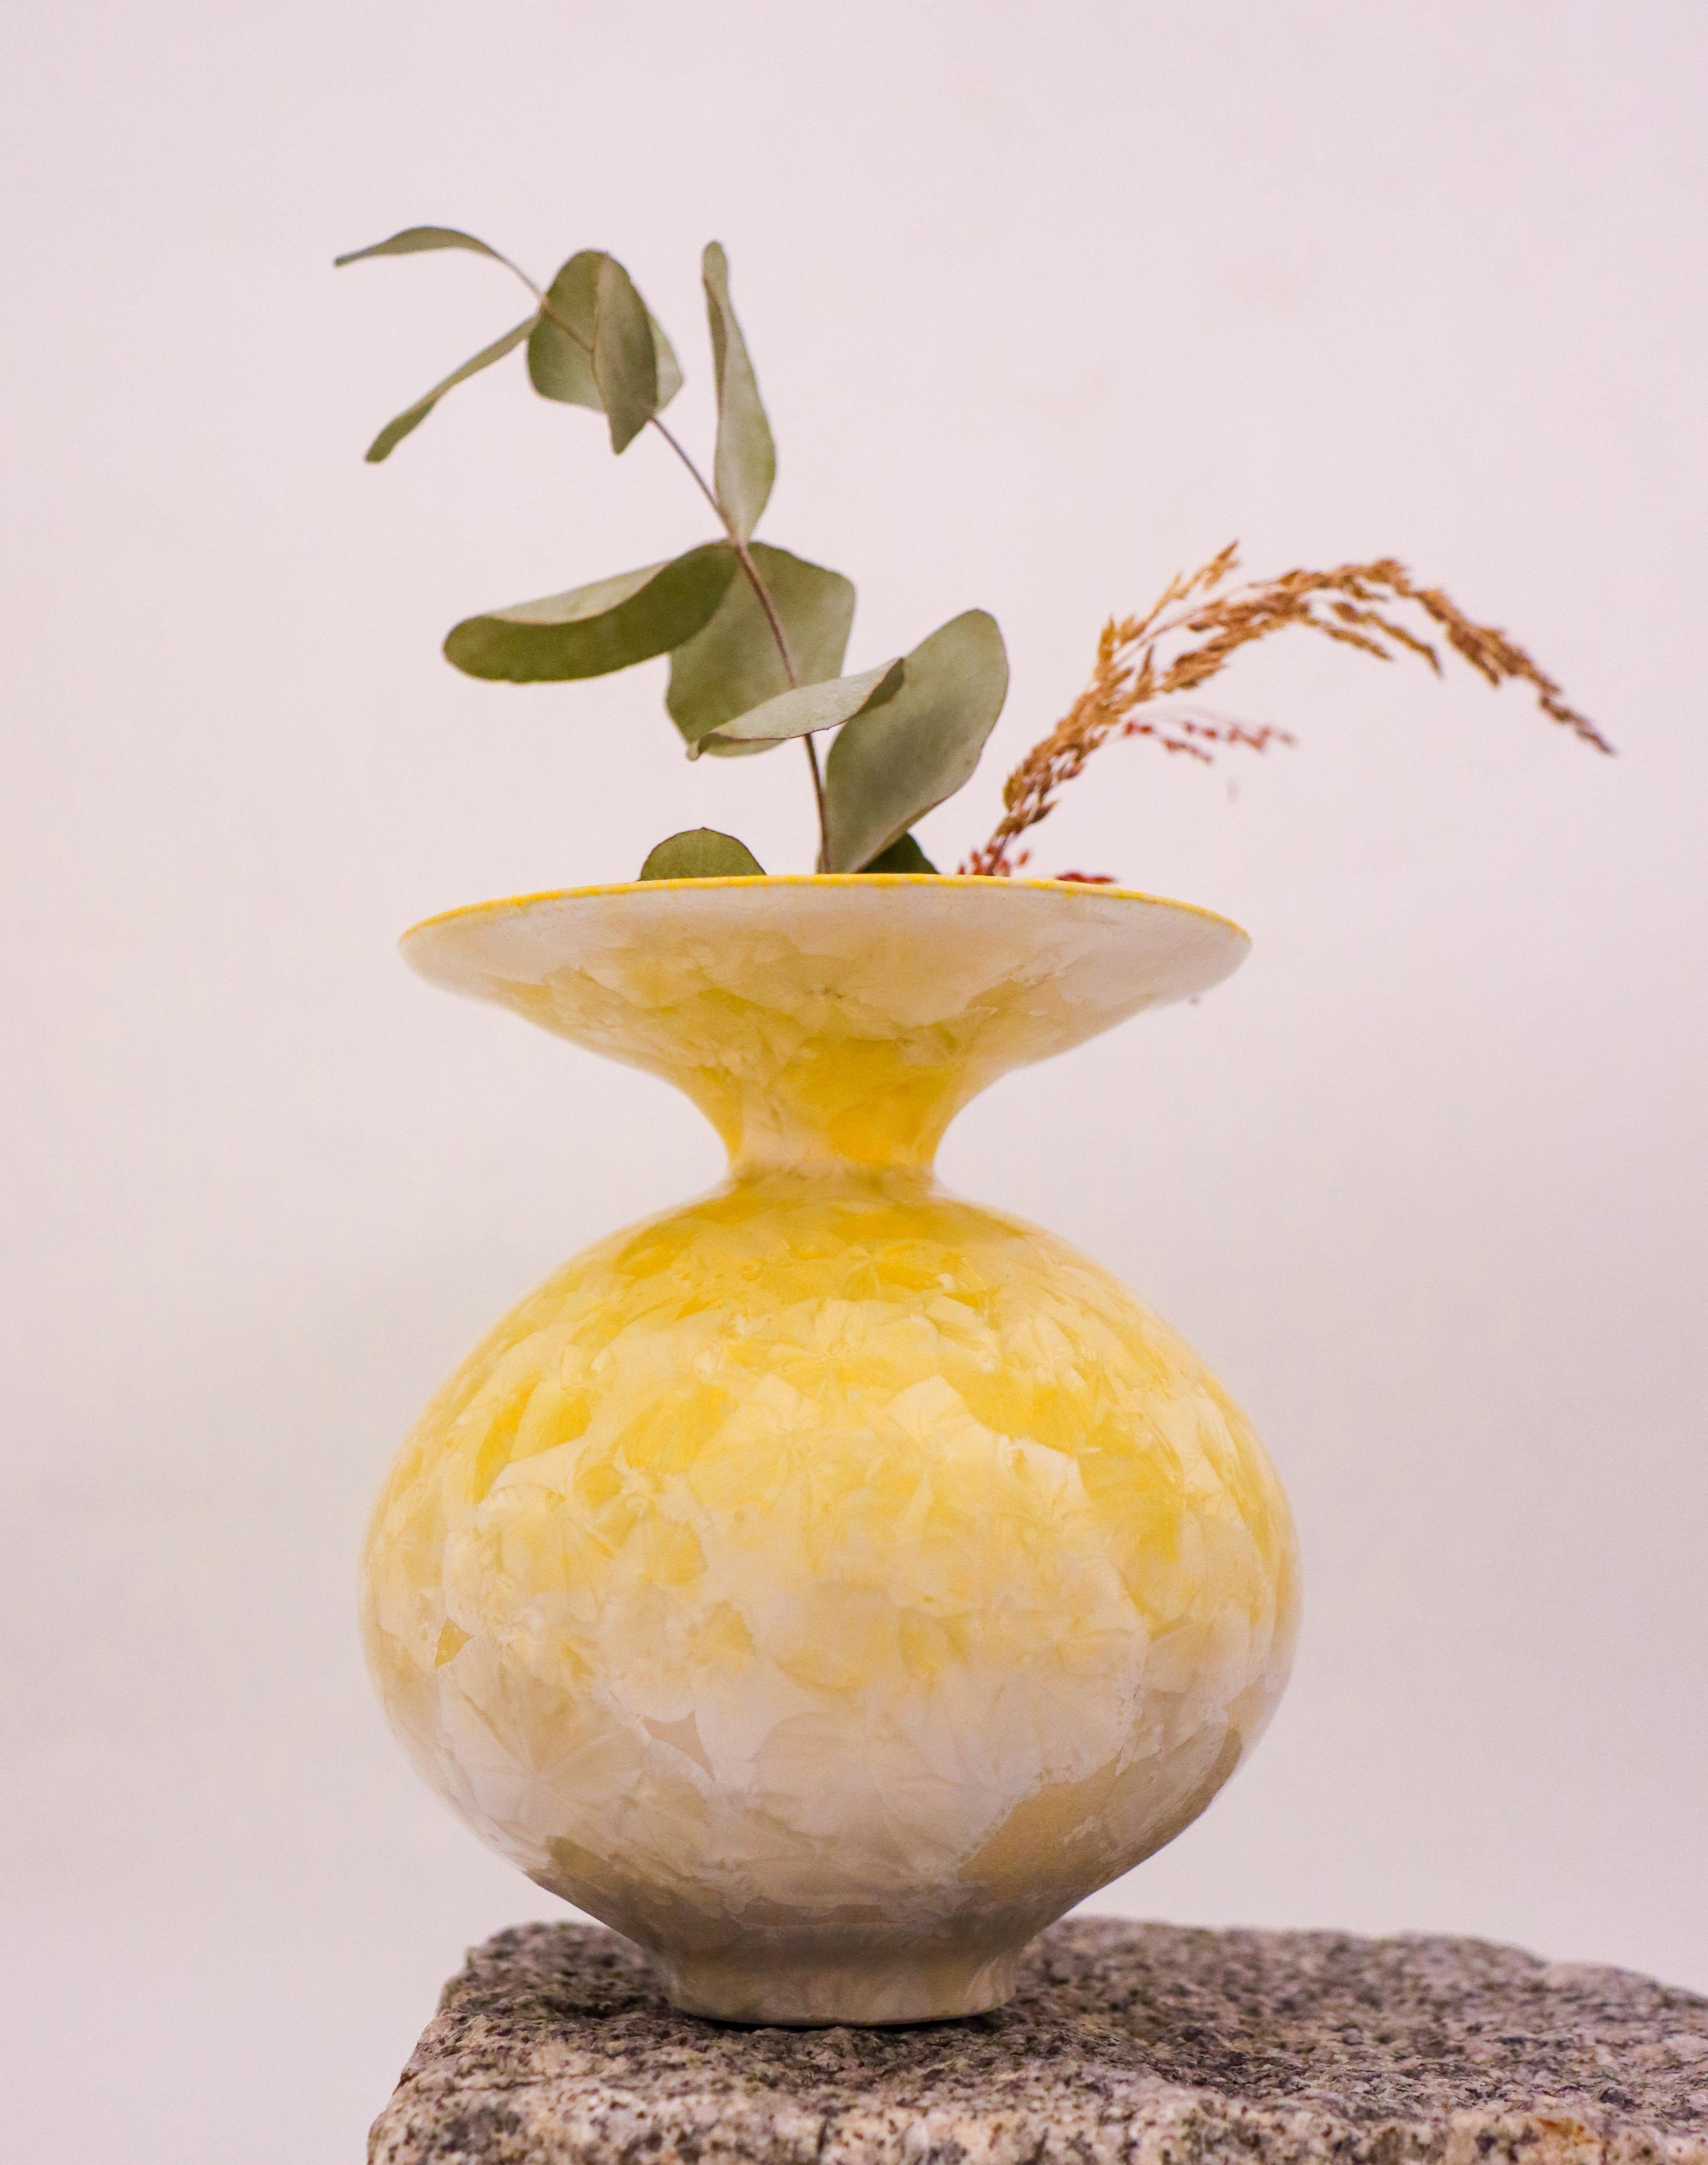 This Isak Isaksson vase showcases a stunning abstract design, with a glossy finish and a beautiful yellow color. The vase stands at a height of 12.5 cm and is made of ceramic, finished with a crystalline glaze. It is a contemporary piece of art